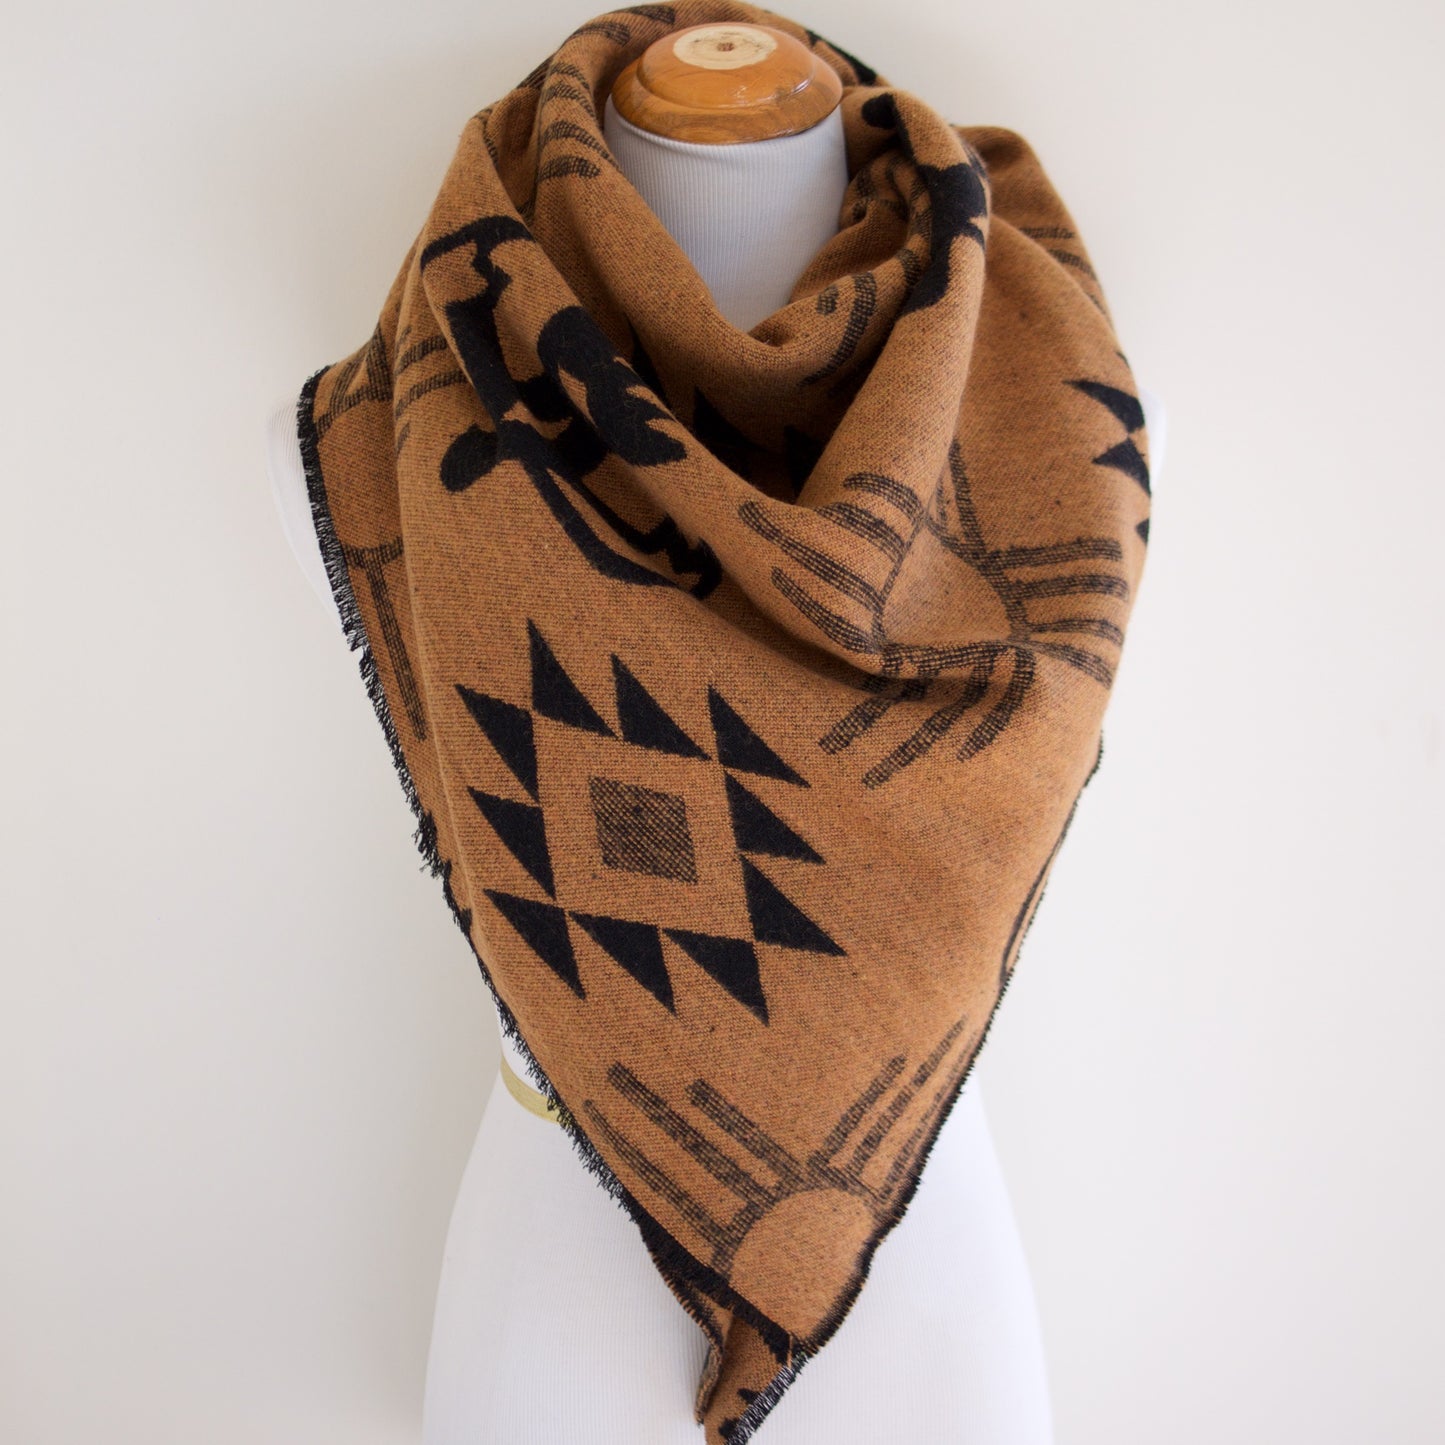 Black and Tan Triangle Scarf